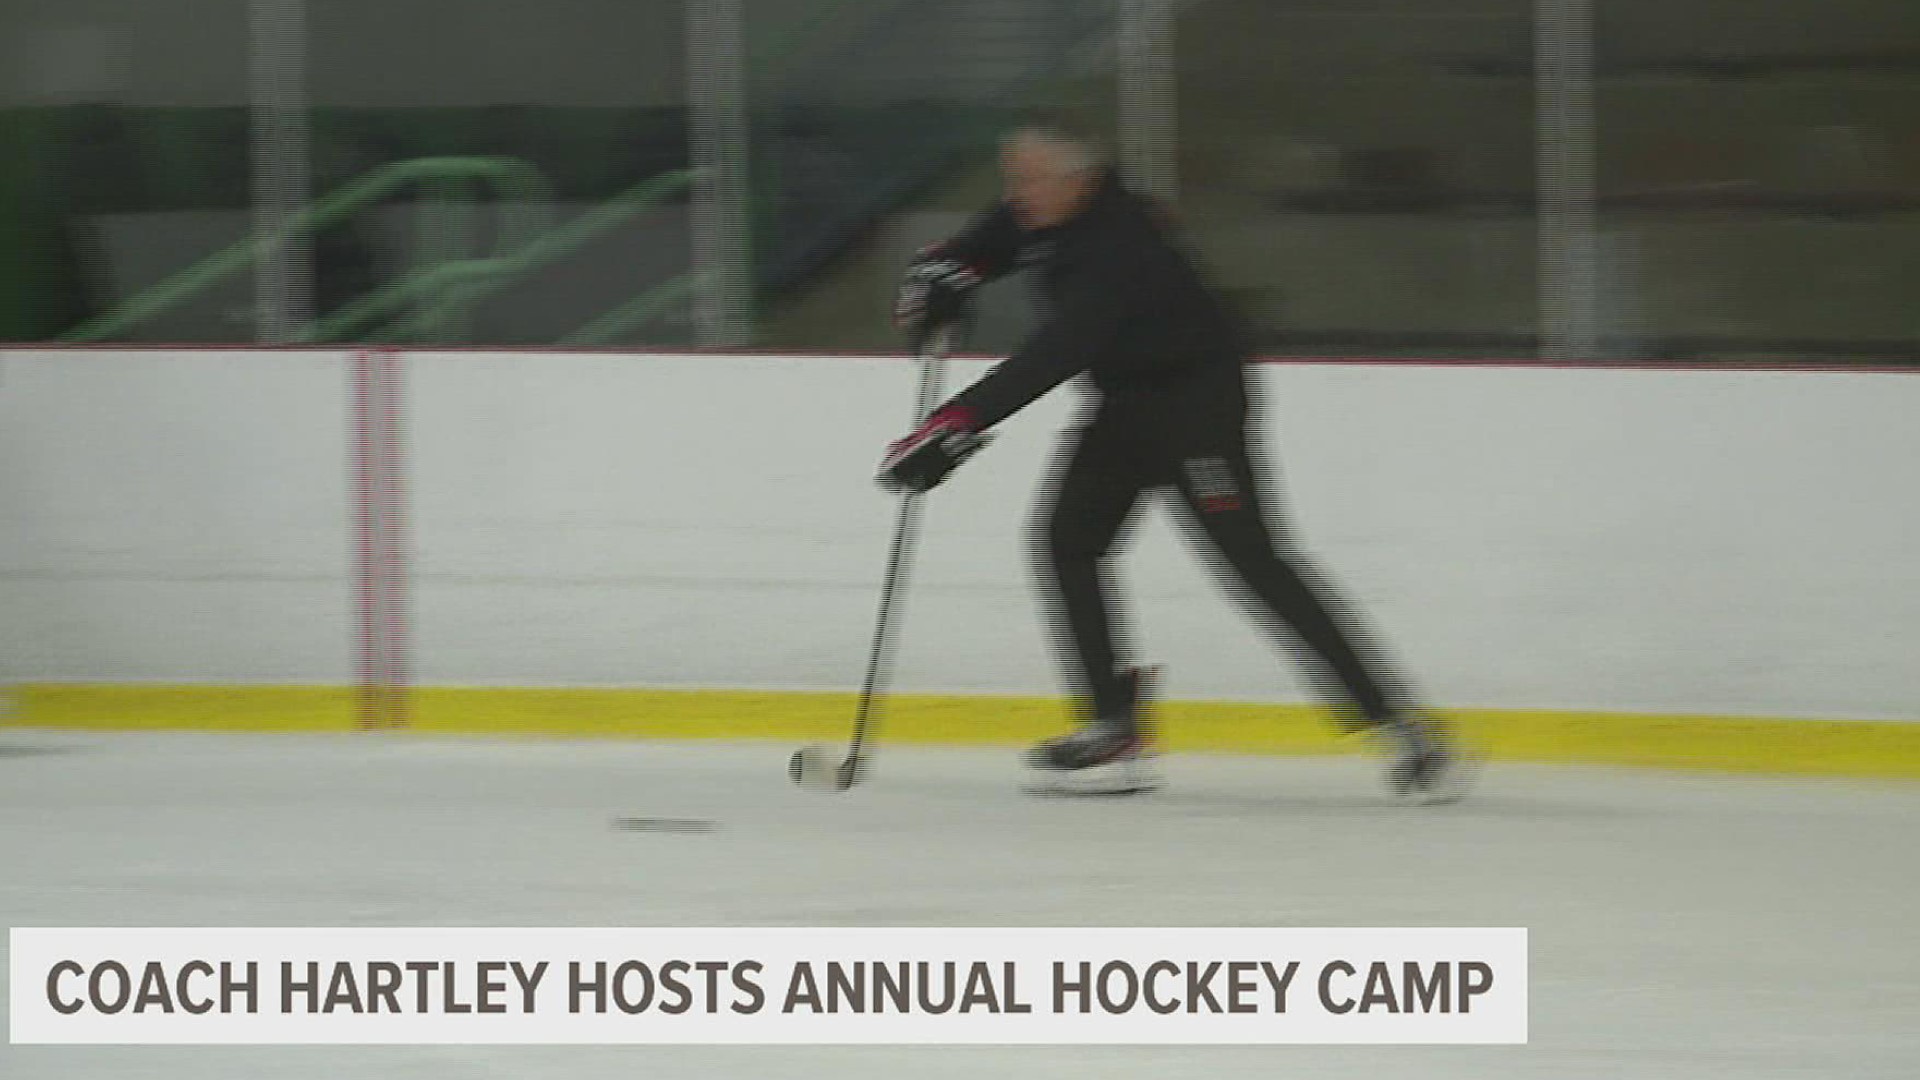 Players and coaches from all over the world stop in York to work with youth hockey players